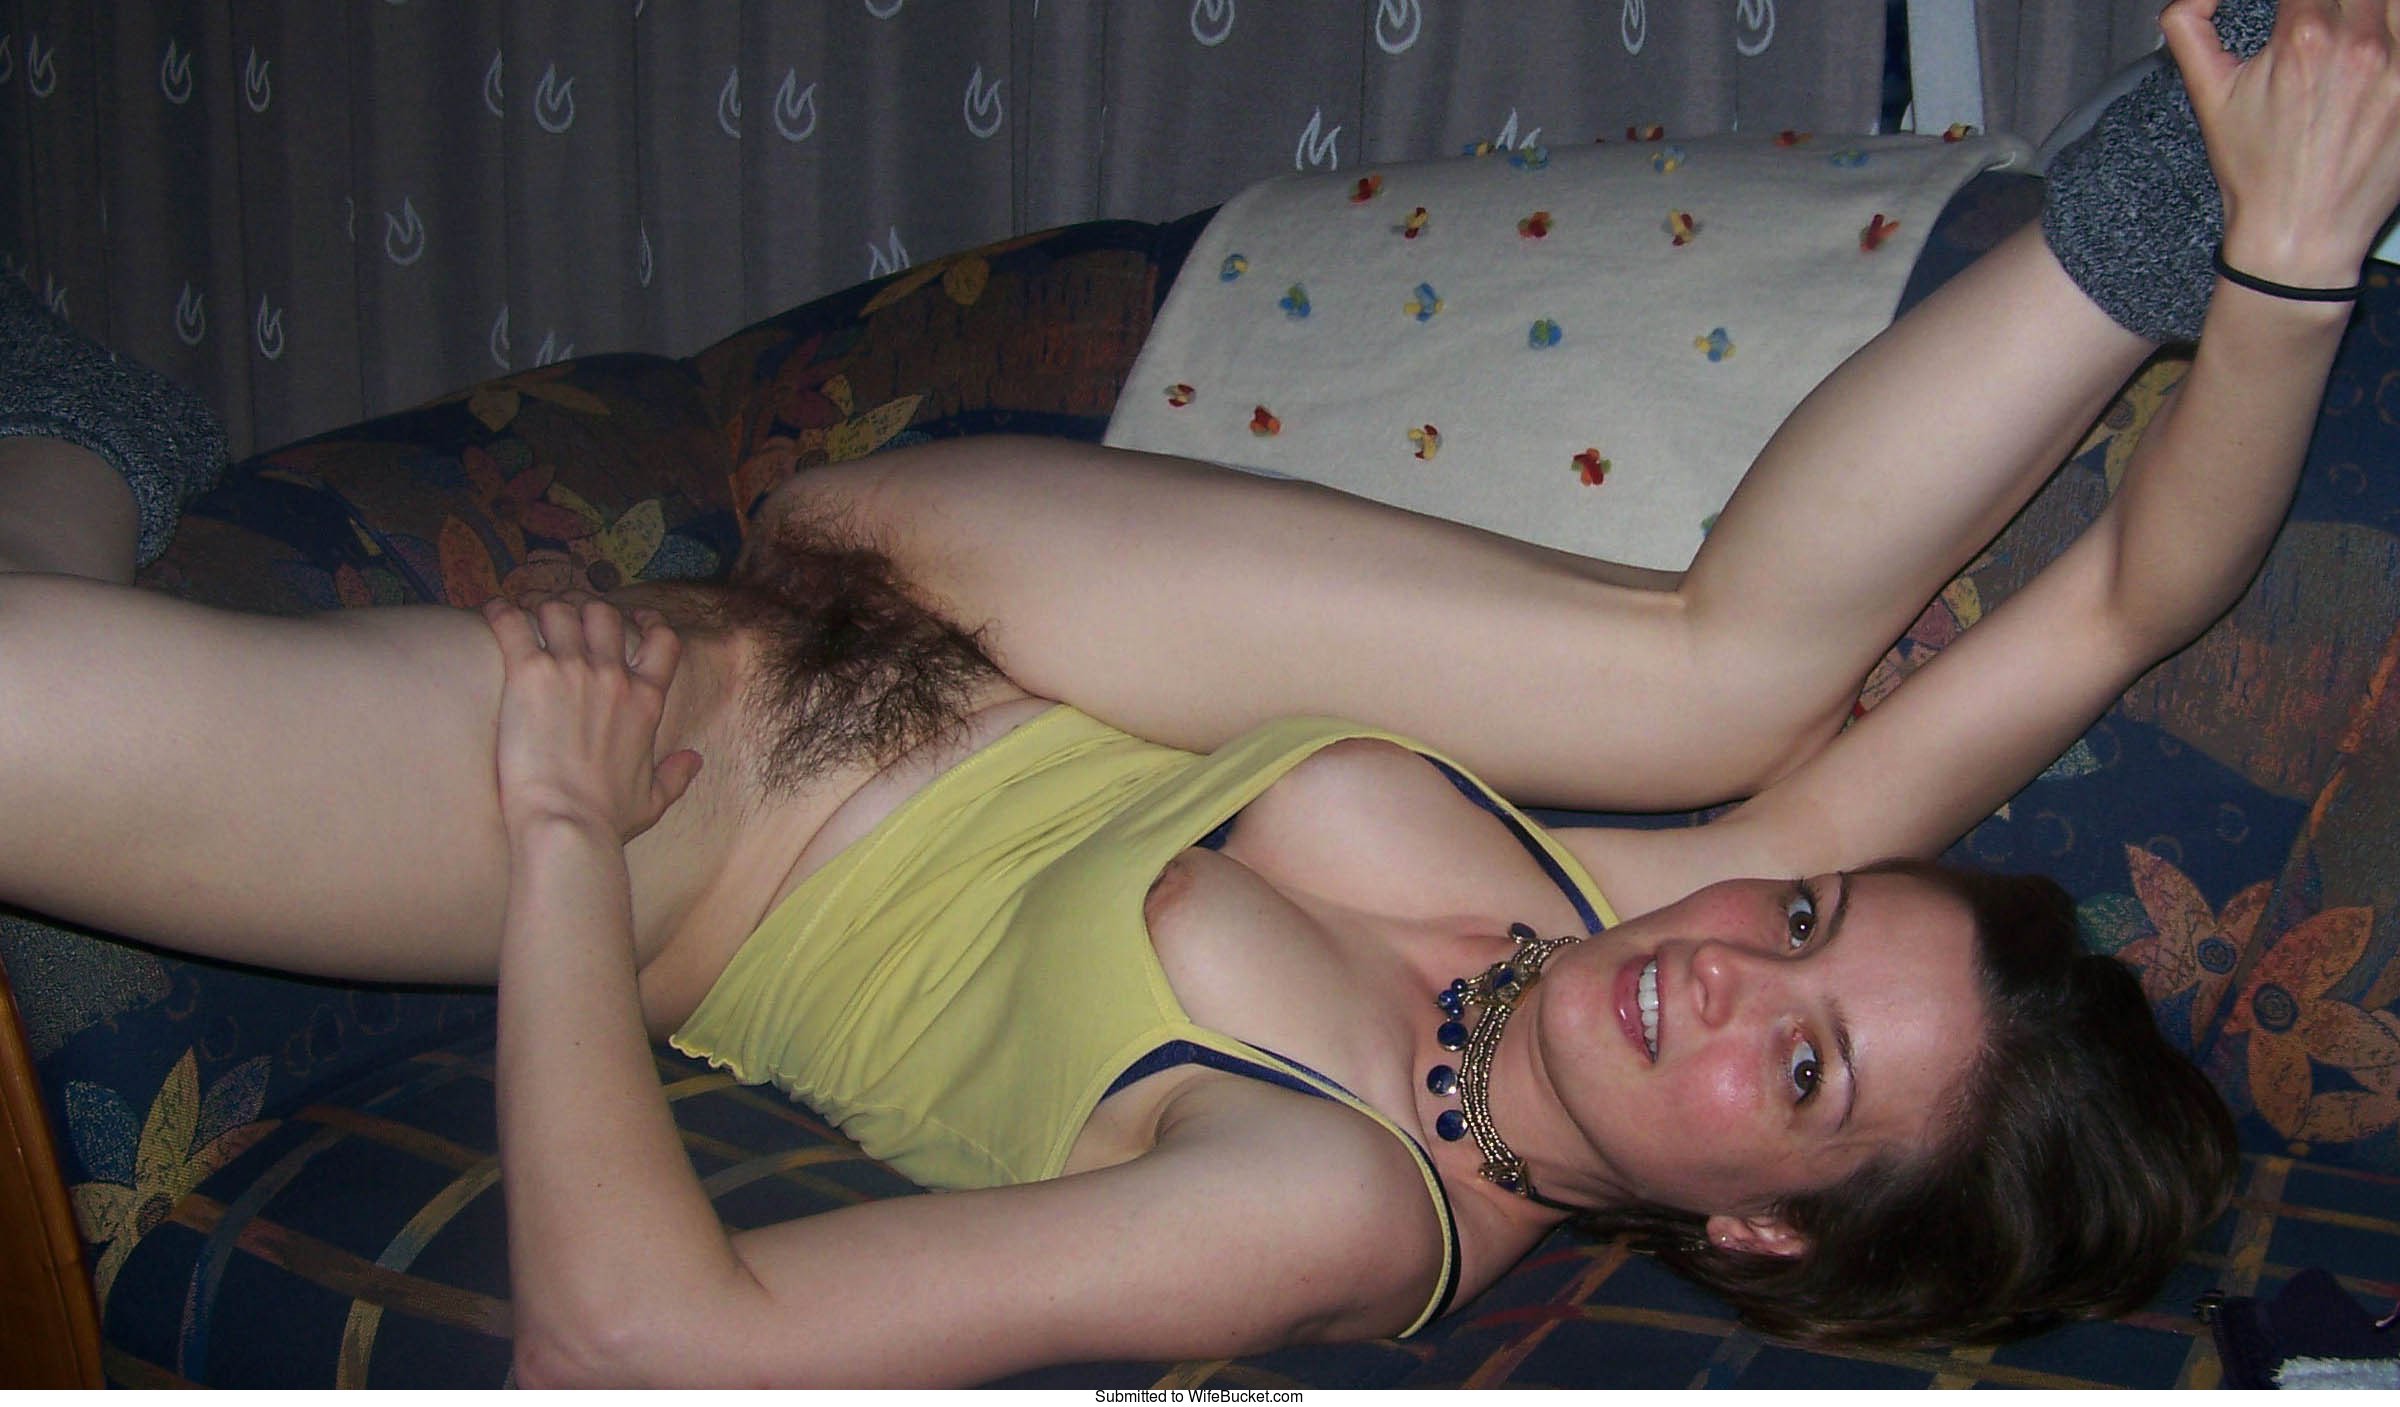 hairy wives submitted photos